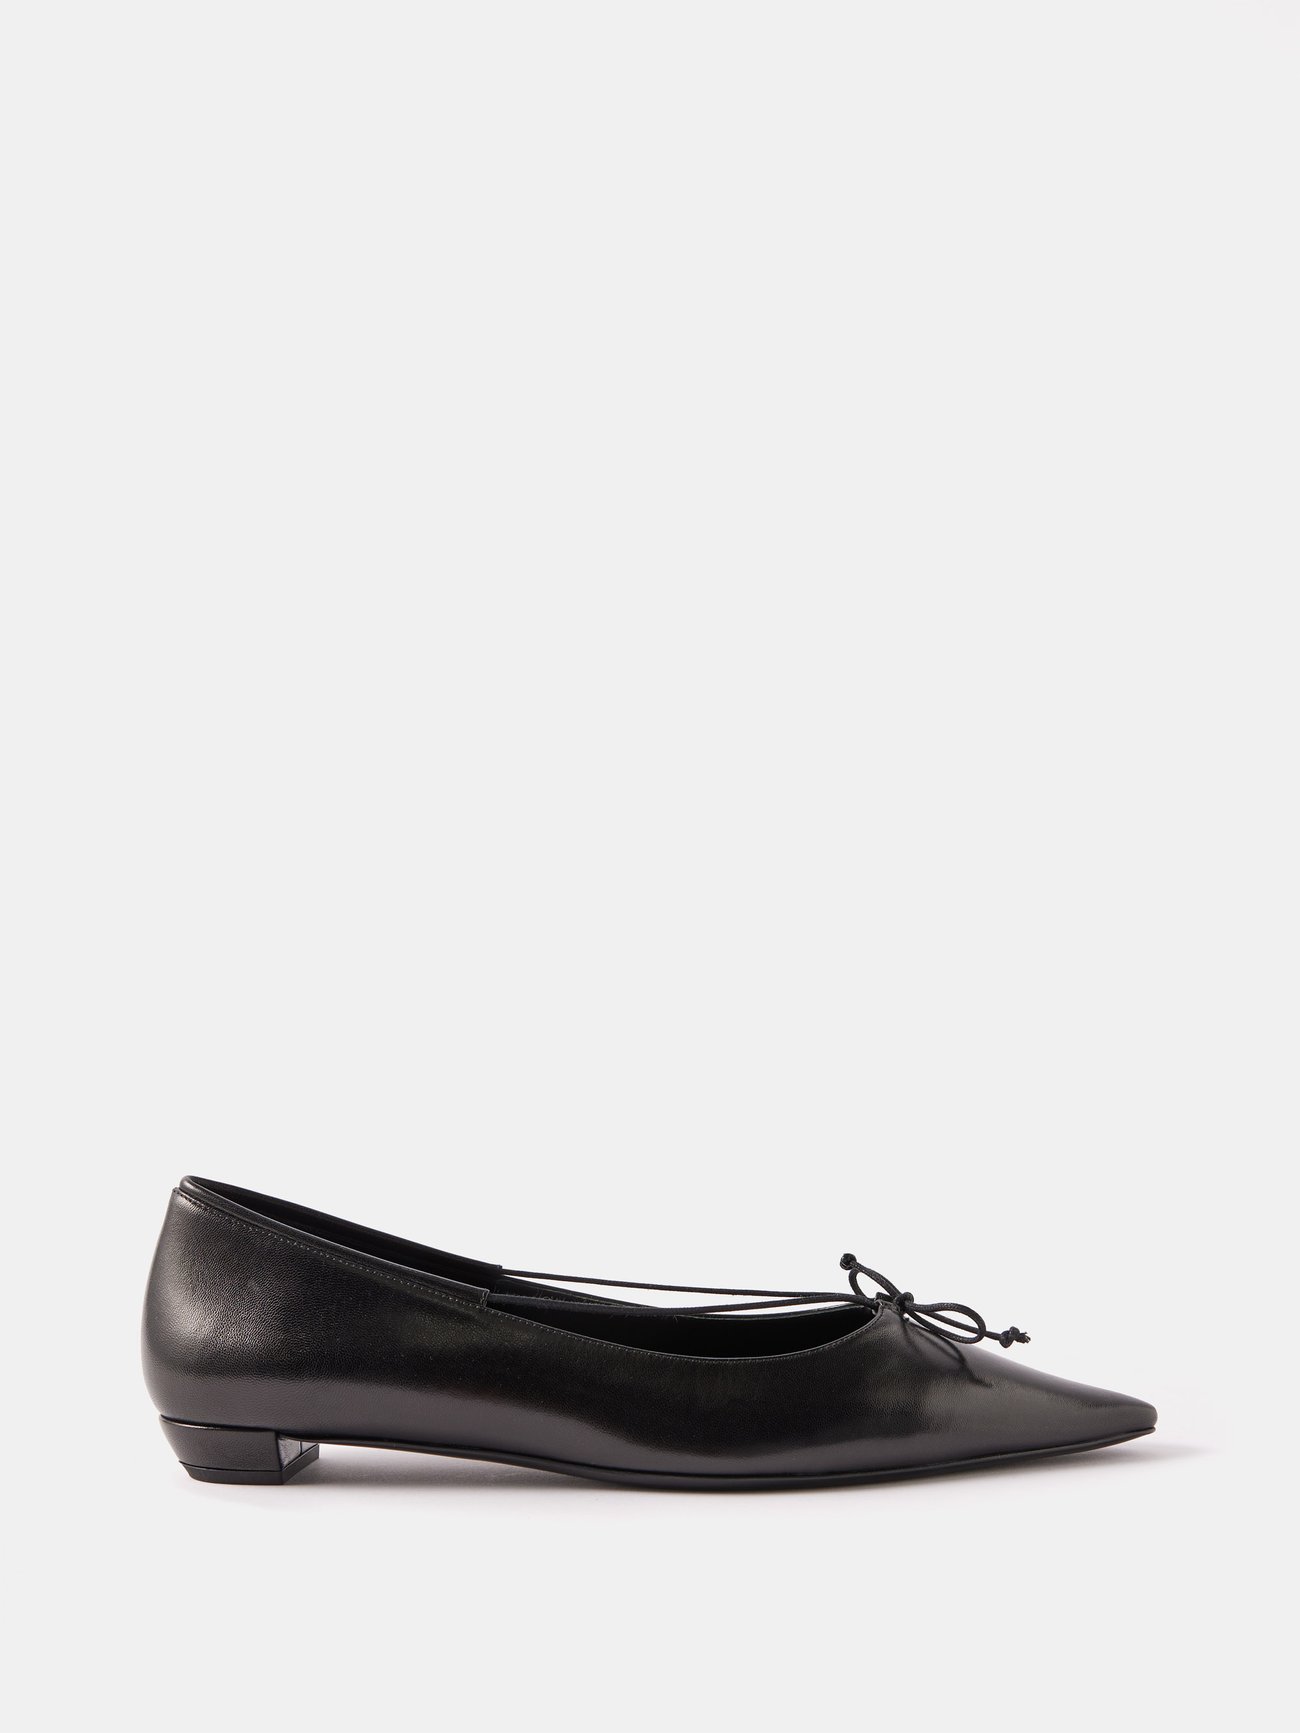 Black Claudette bow leather ballet flats | The Row | MATCHES UK